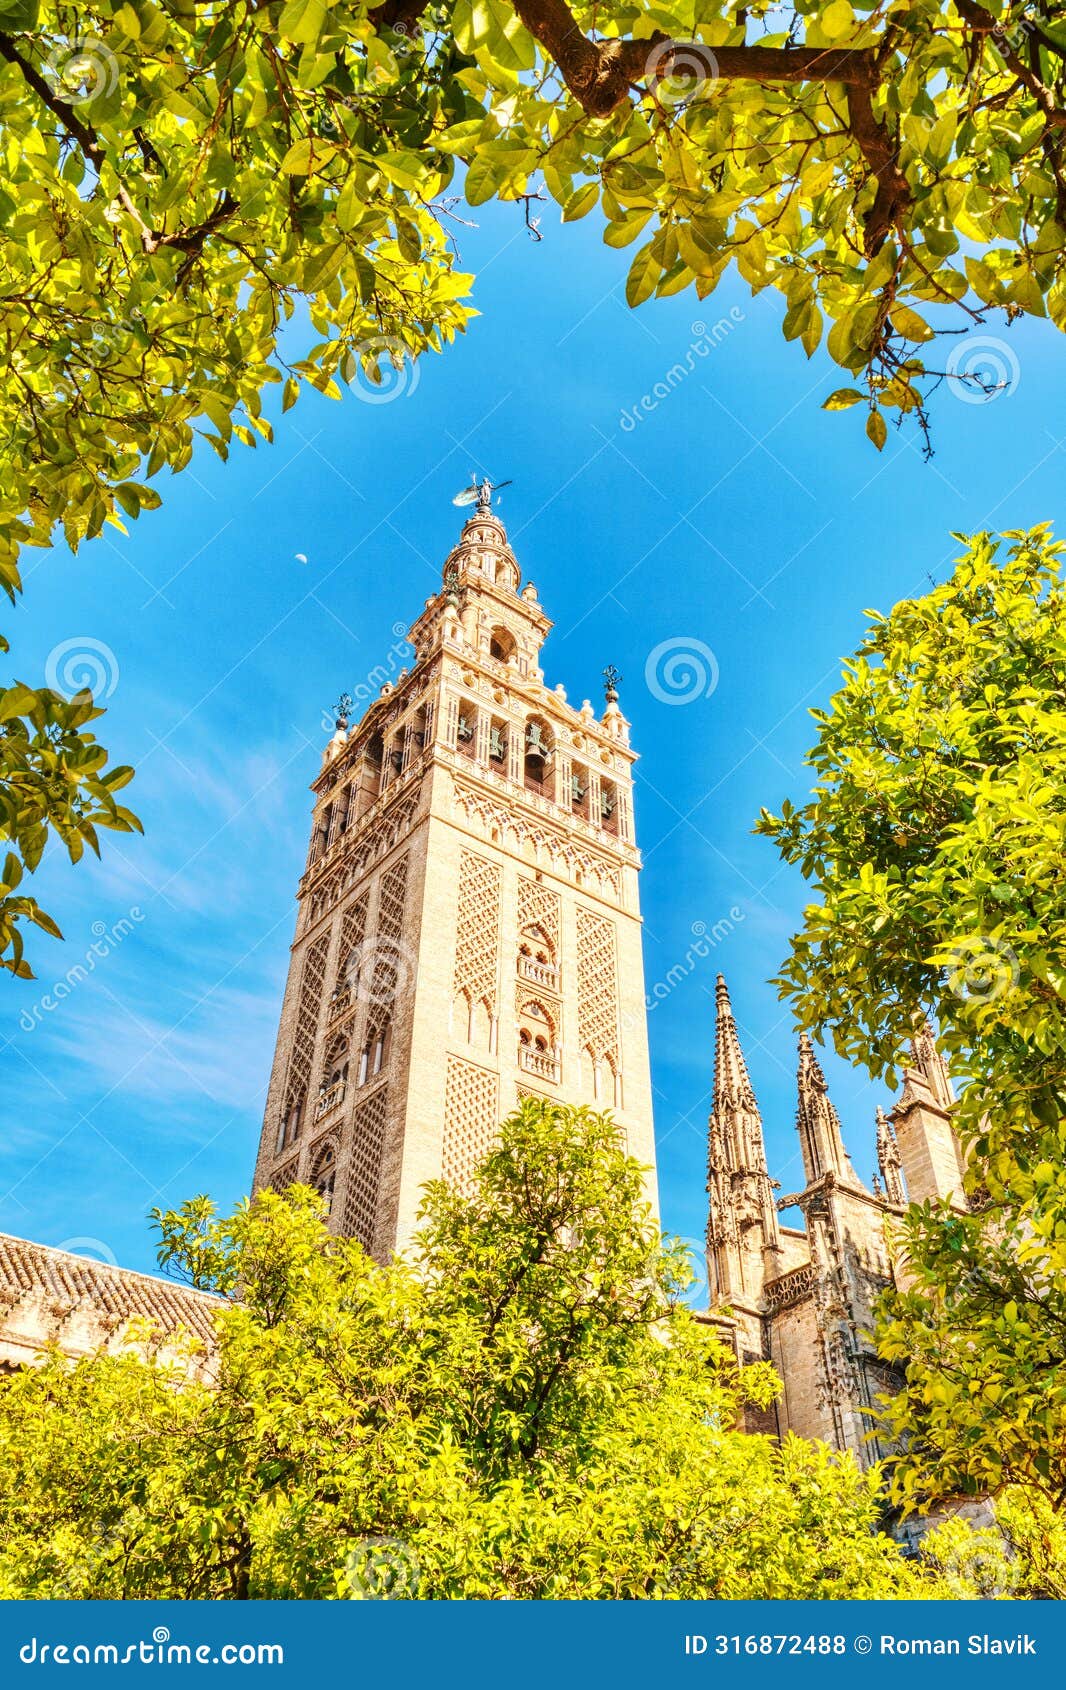 seville cathedral and giralda tower during beautiful sunny day in seville